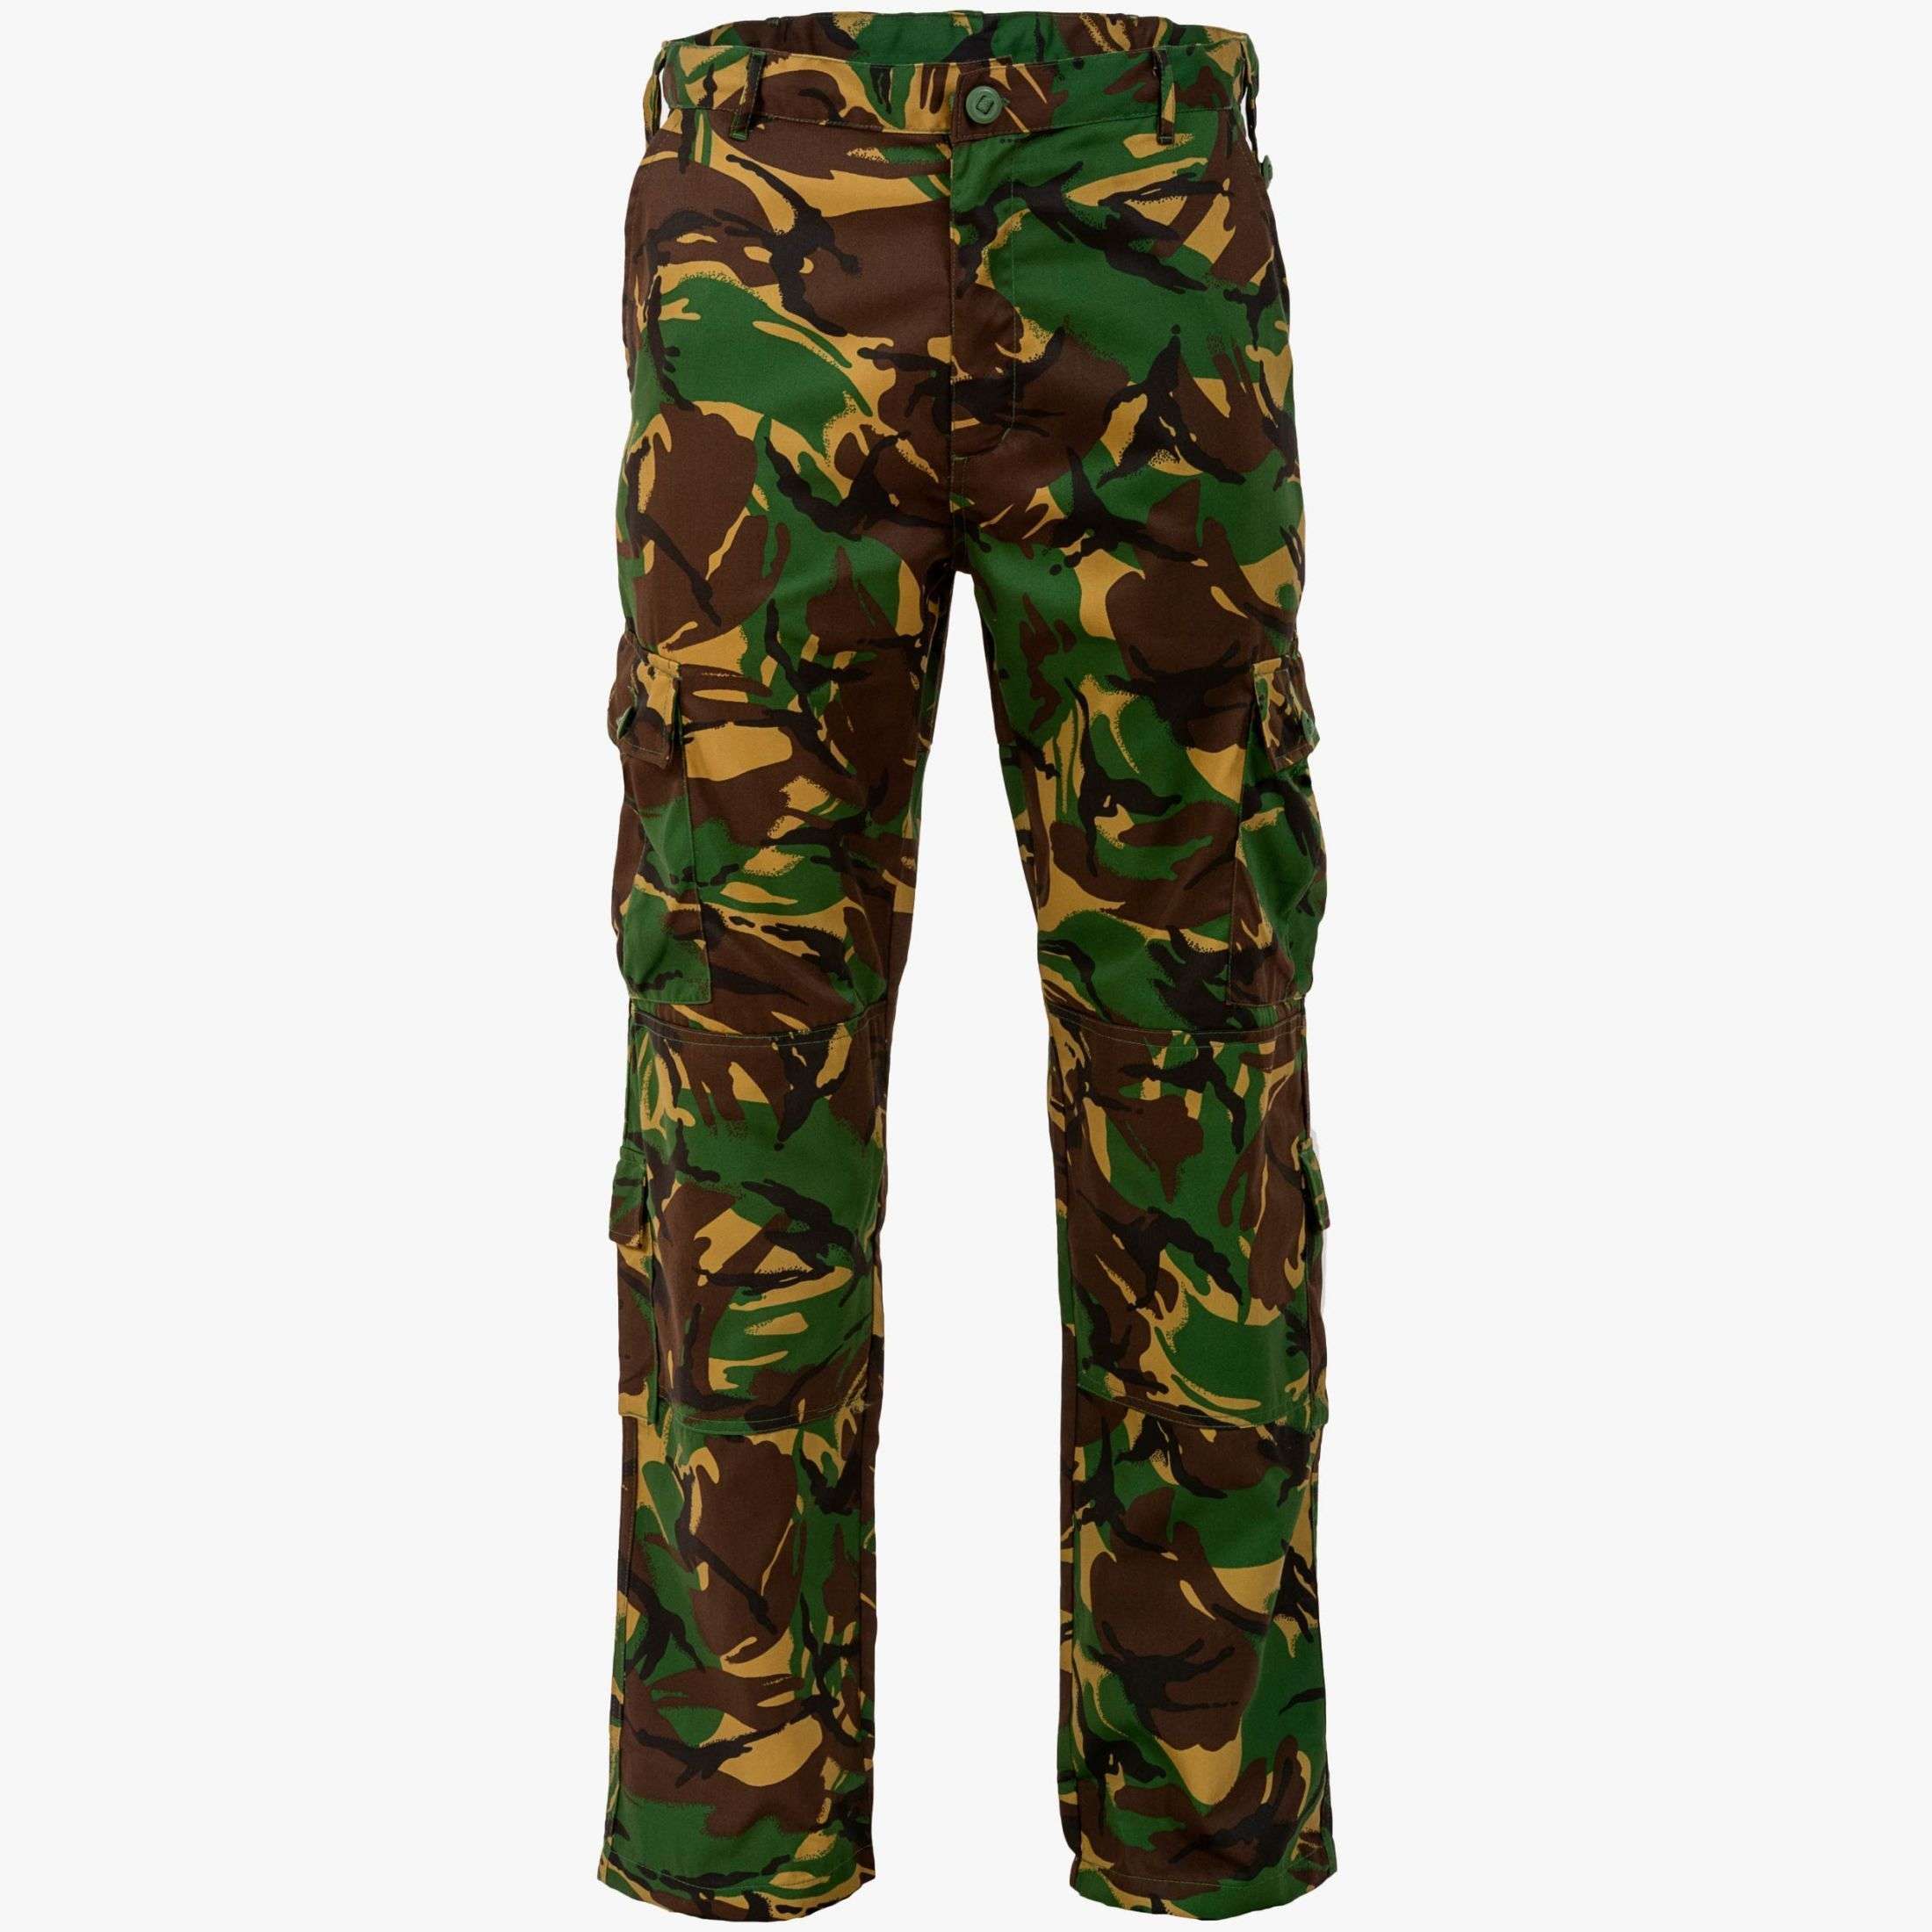 Highlander, Highlander Elite Trousers, Trousers & Shorts,Wylies Outdoor World,